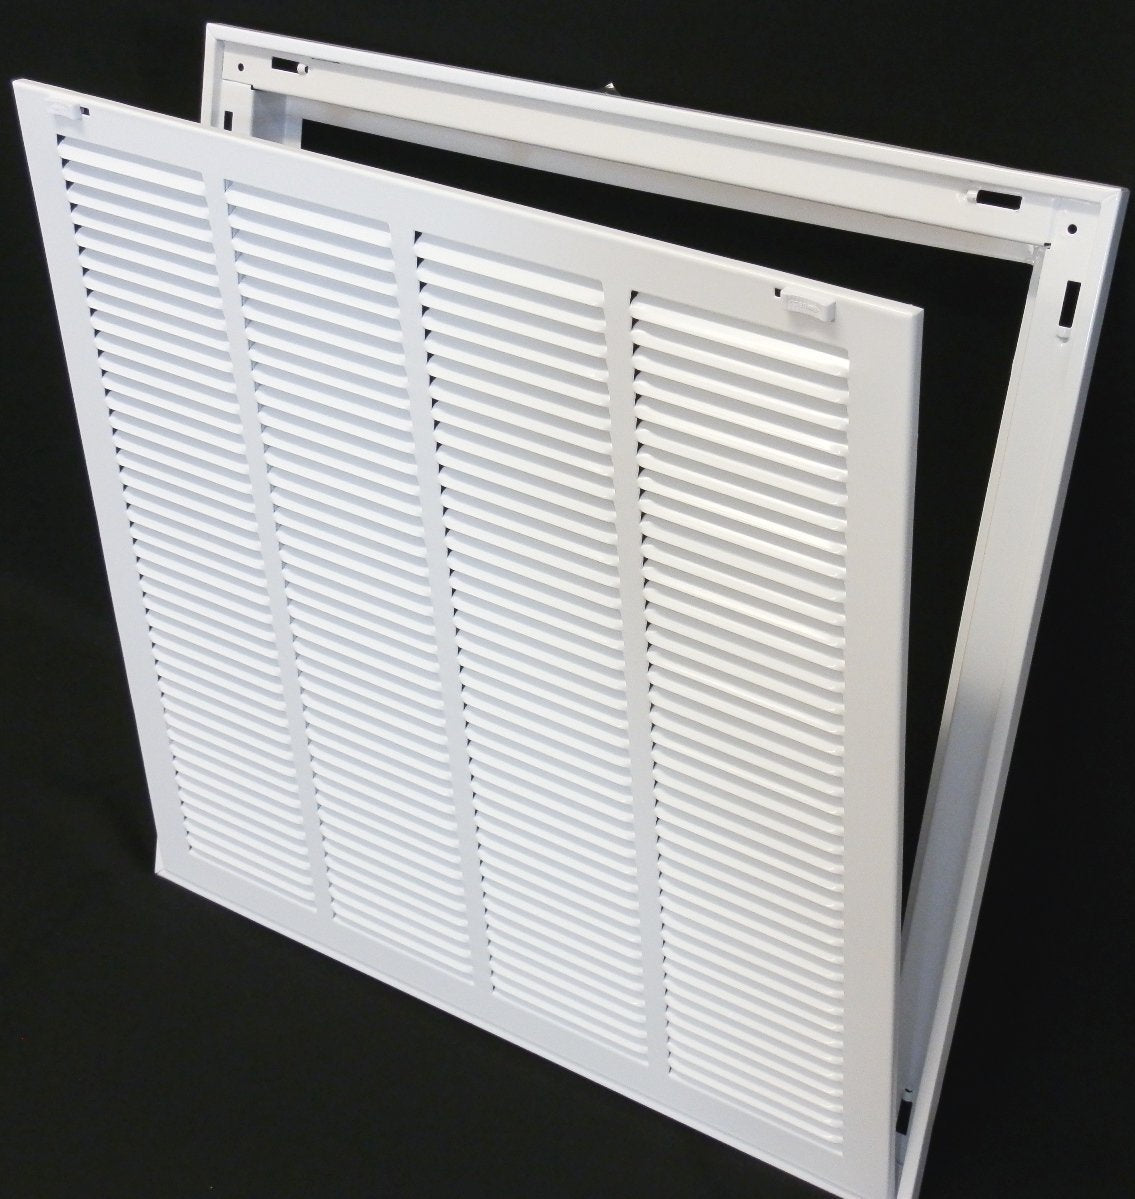 22&quot; X 12&quot; Steel Return Air Filter Grille for 1&quot; Filter - Removable Frame - [Outer Dimensions: 24 5/8&quot; X 14 5/8&quot;]